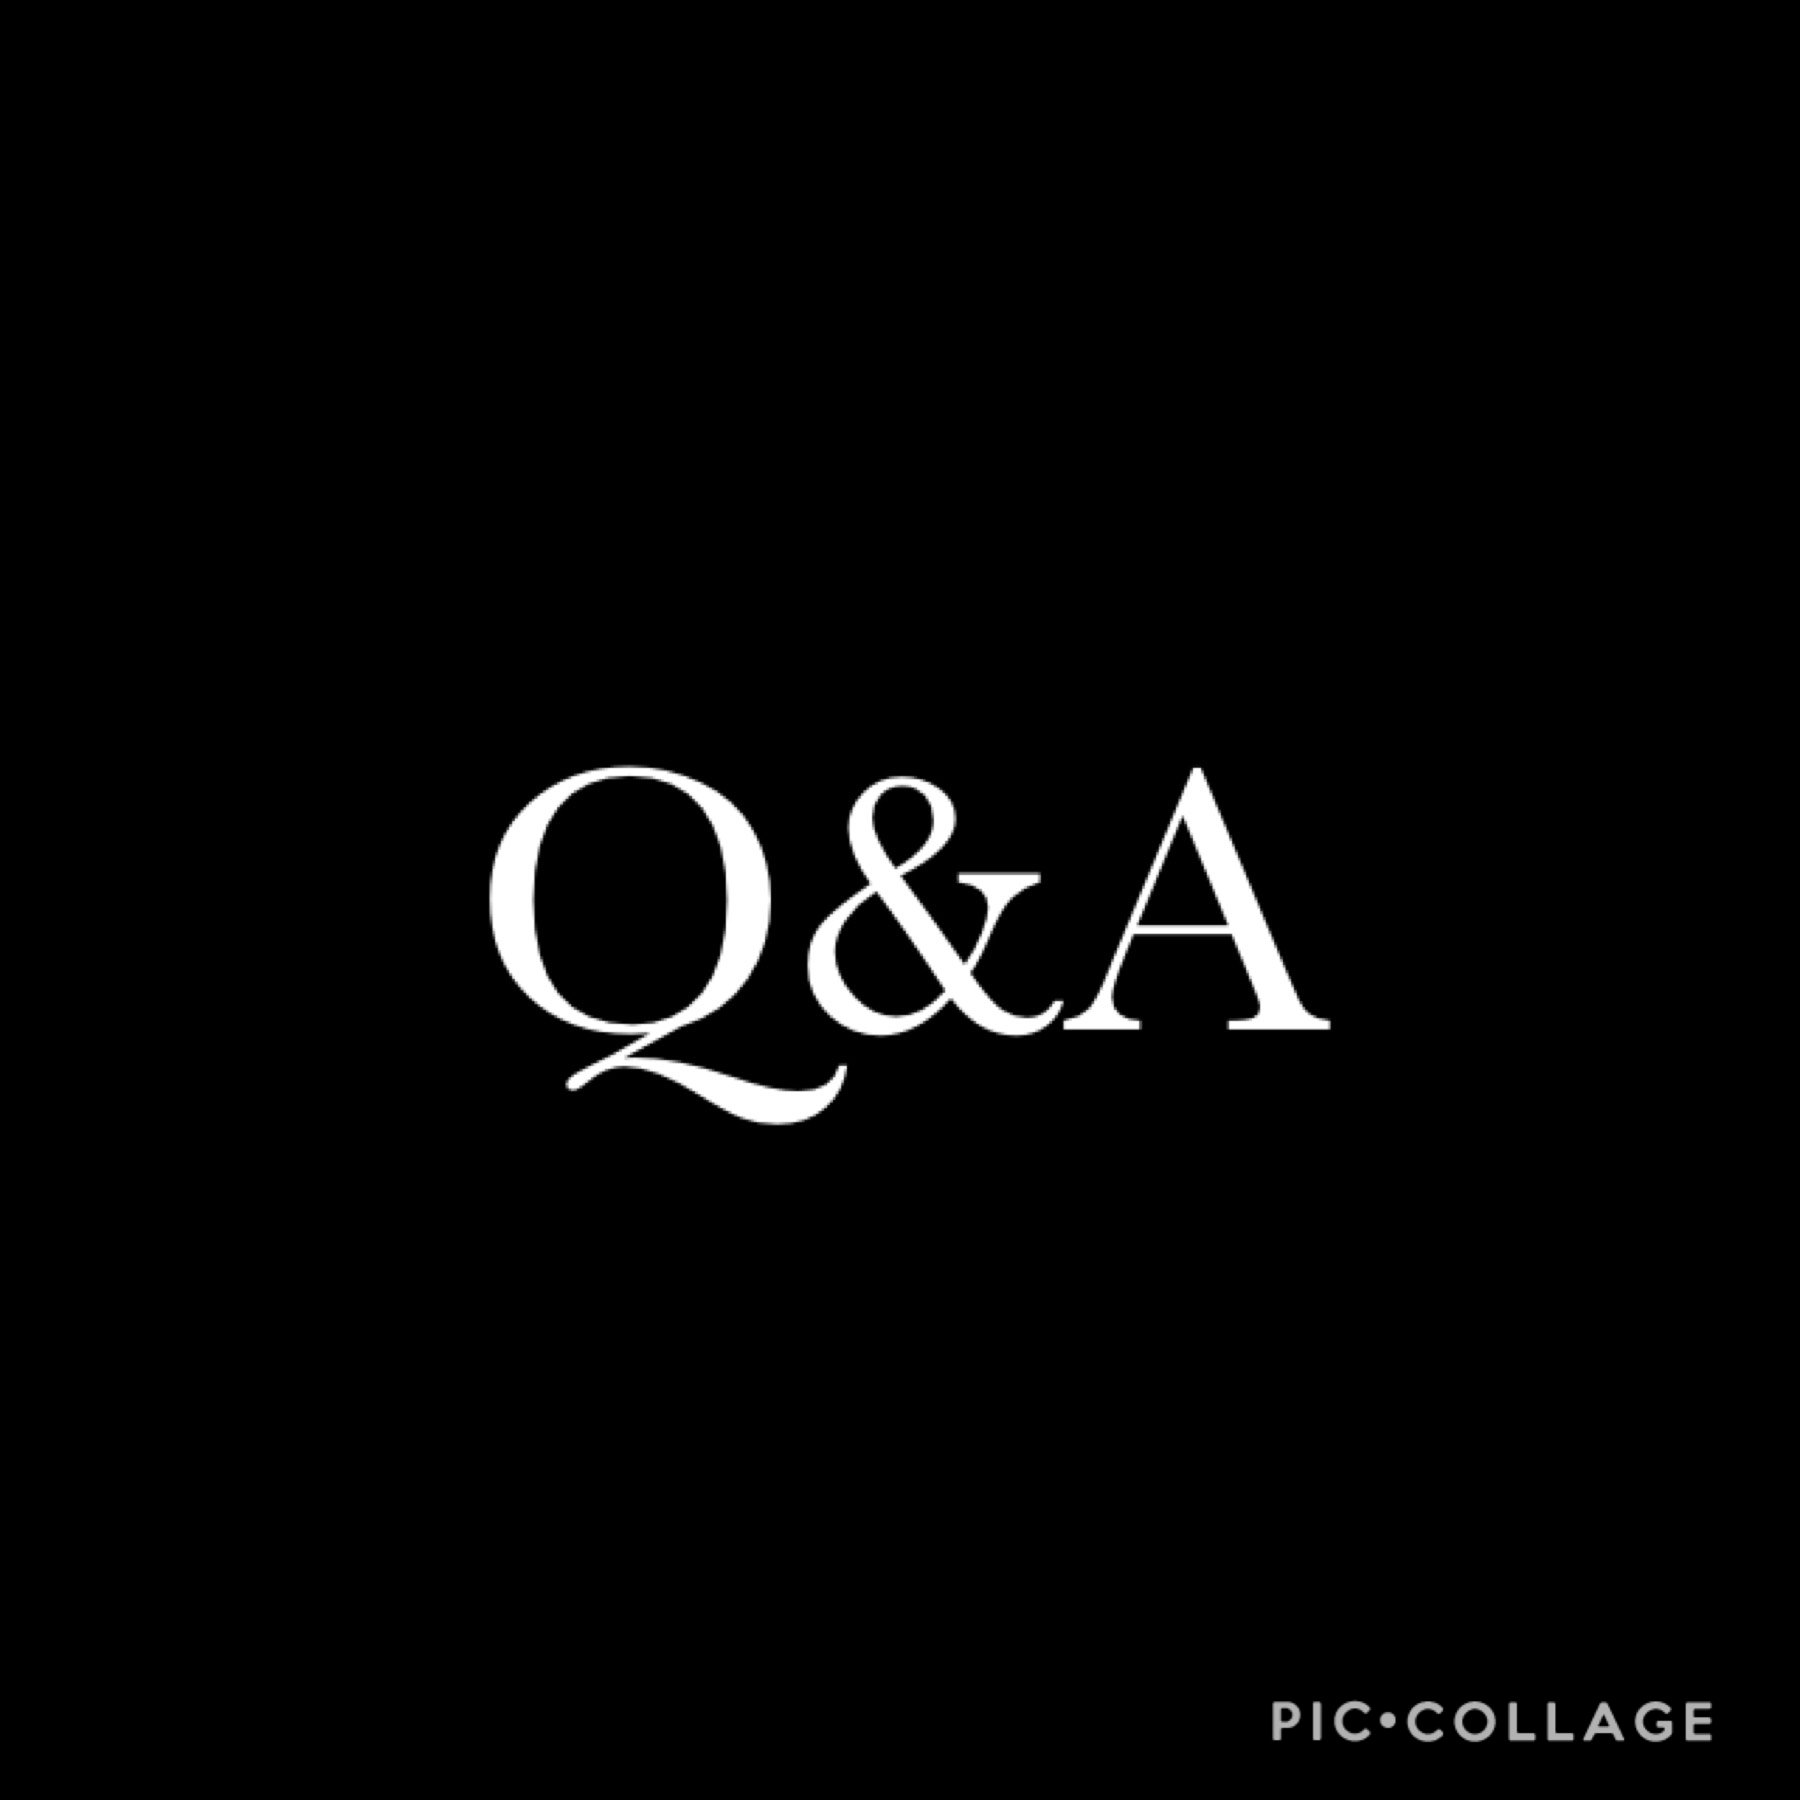 Tap
Q&A ask me questions here and every Sunday I will answer them